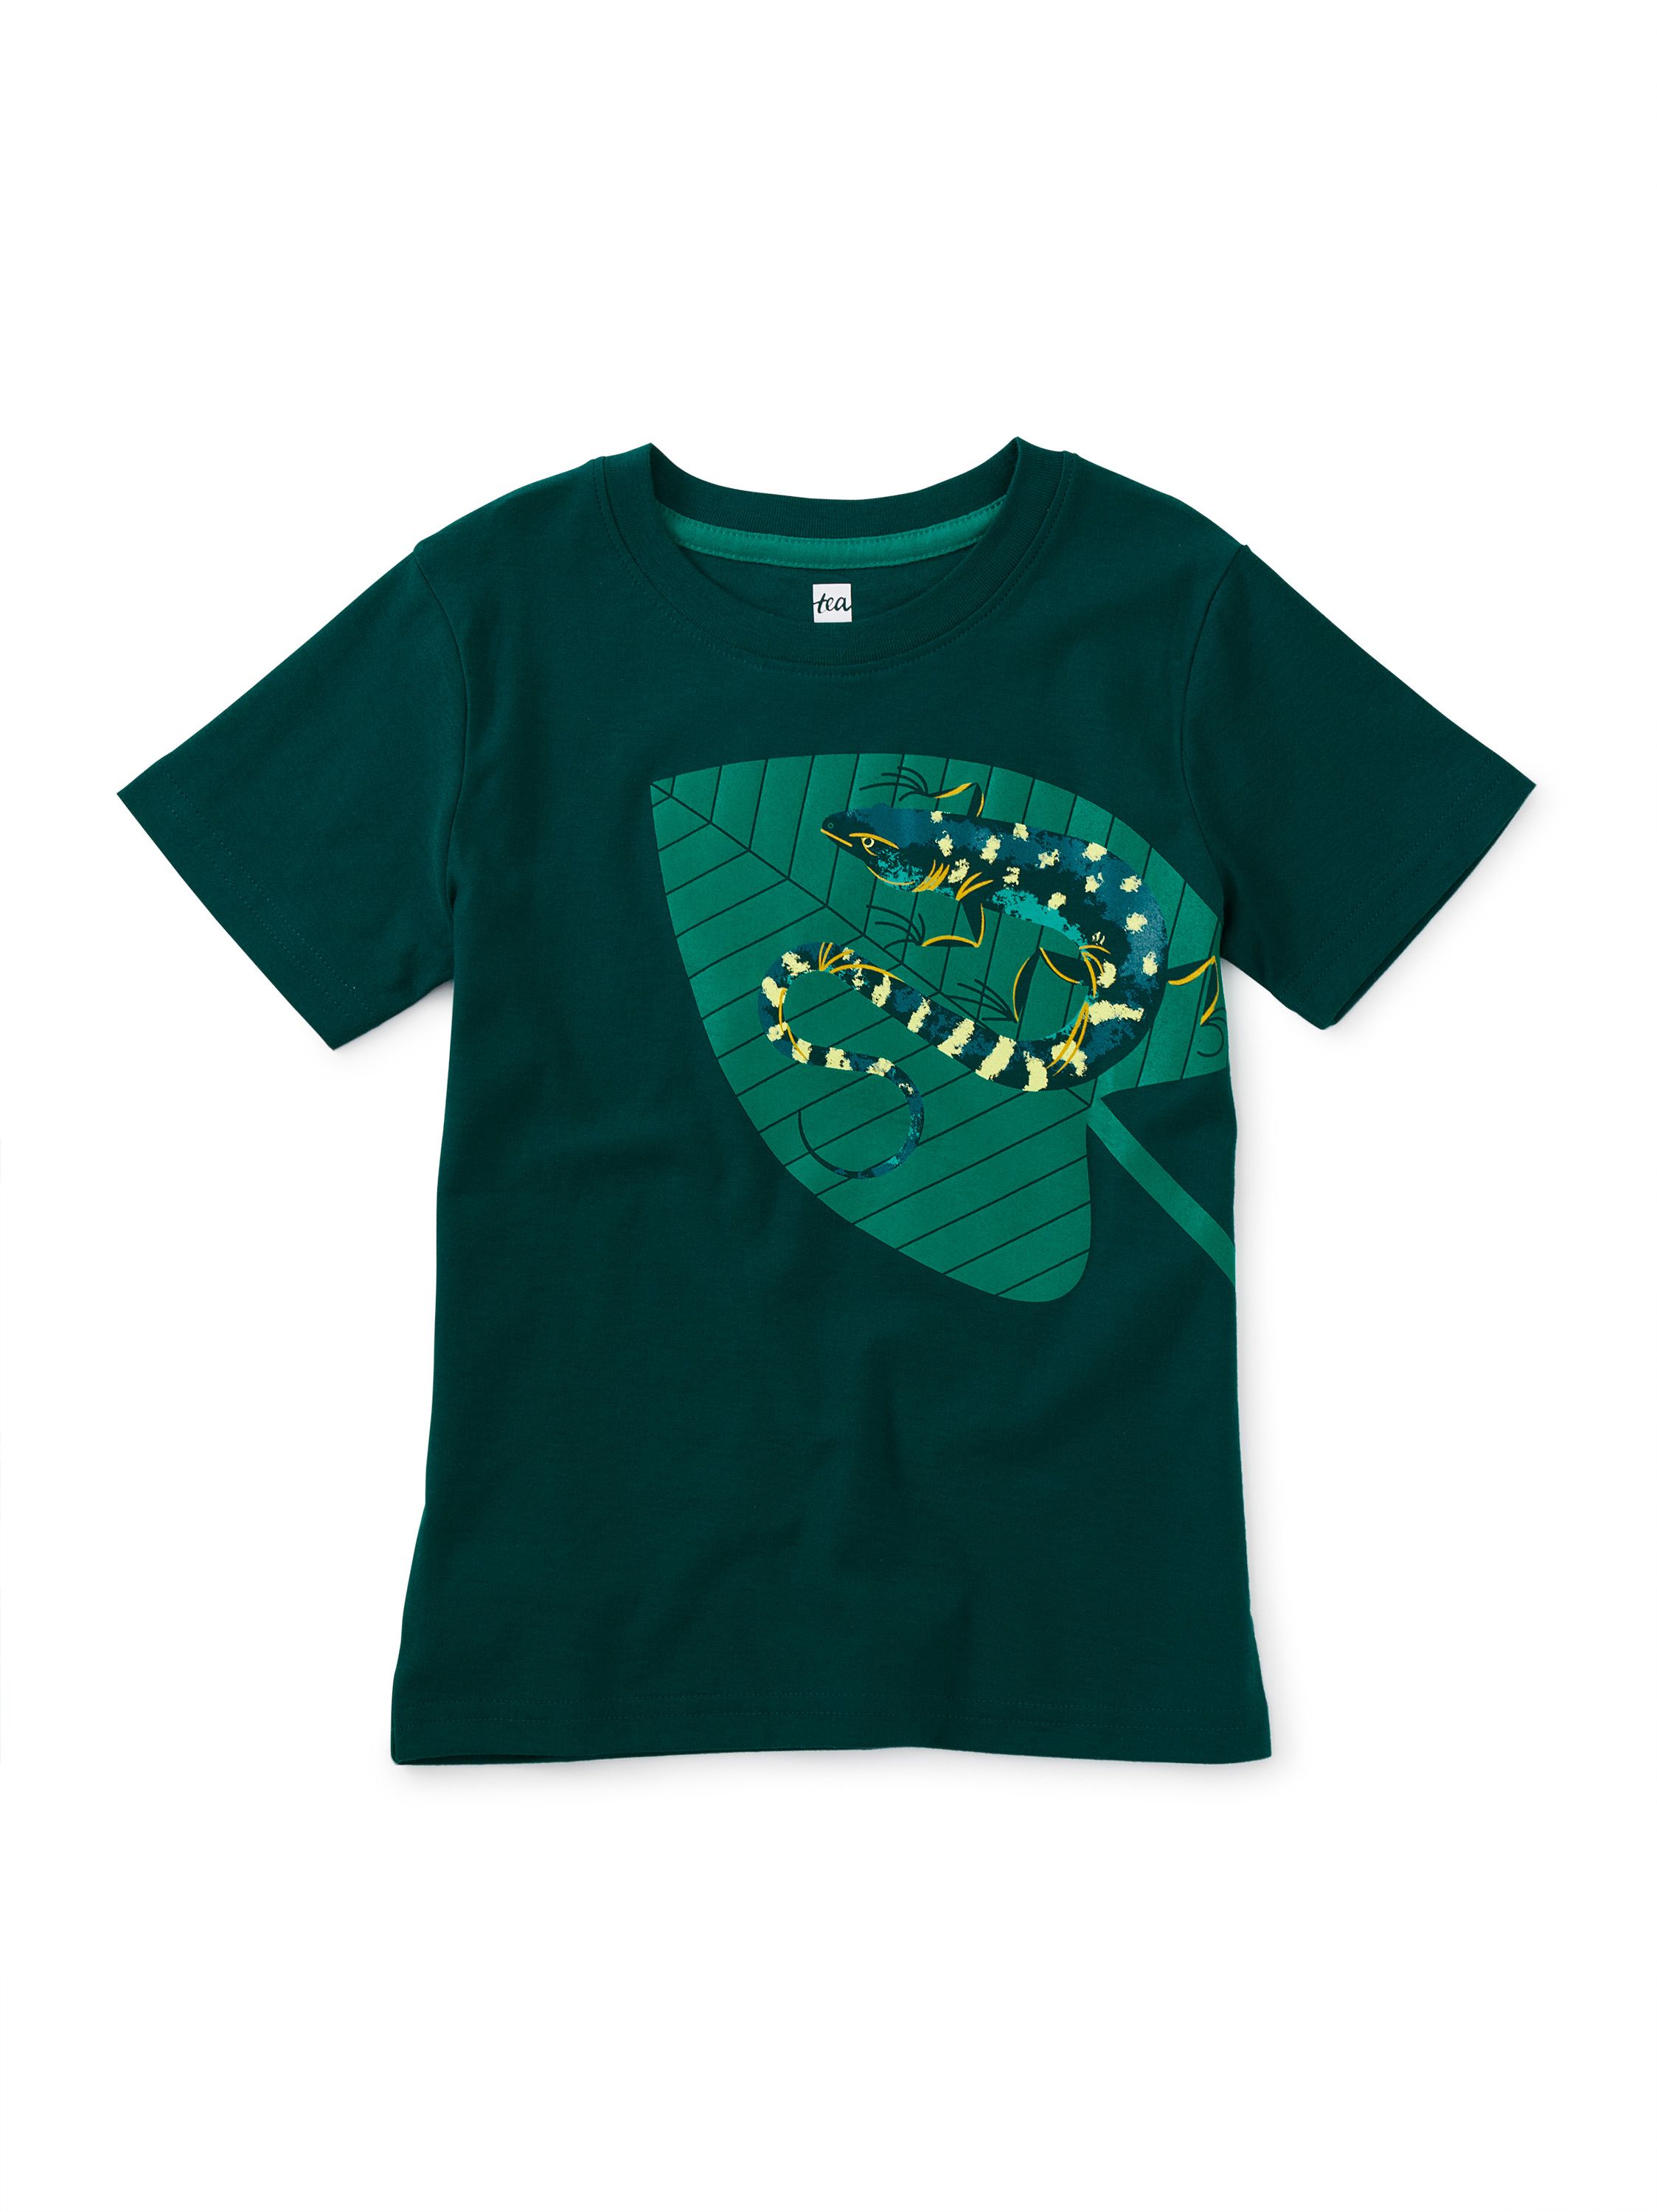 Lizard on a Leaf Graphic Tee | Tea Collection